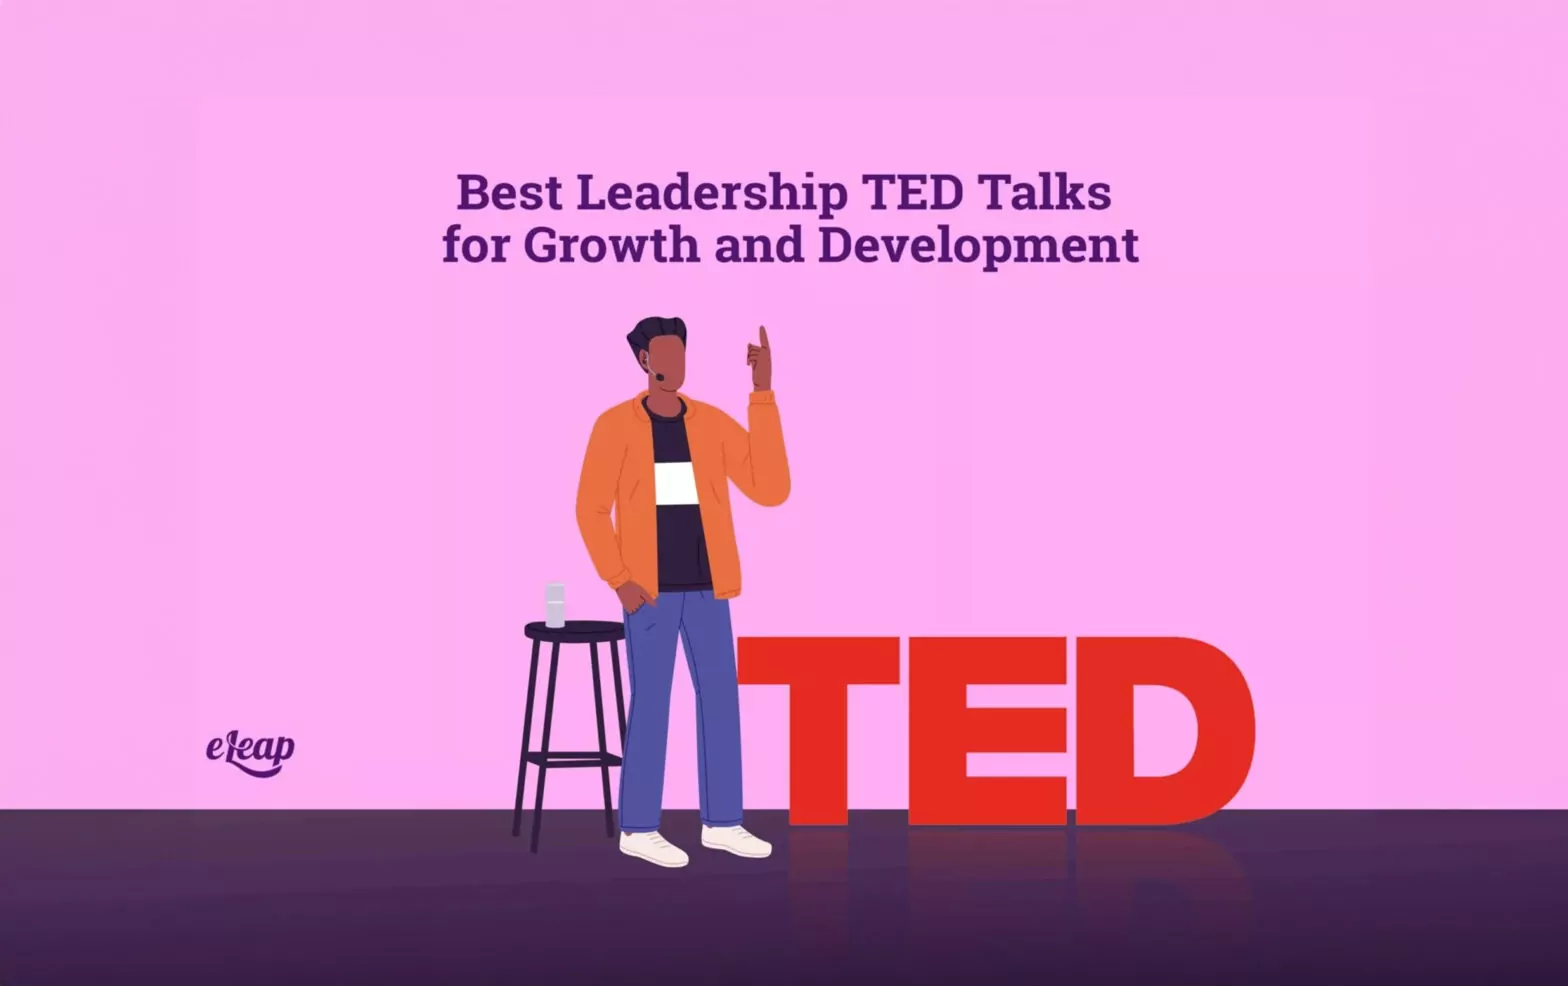 Best Leadership TED Talks for Growth and Development